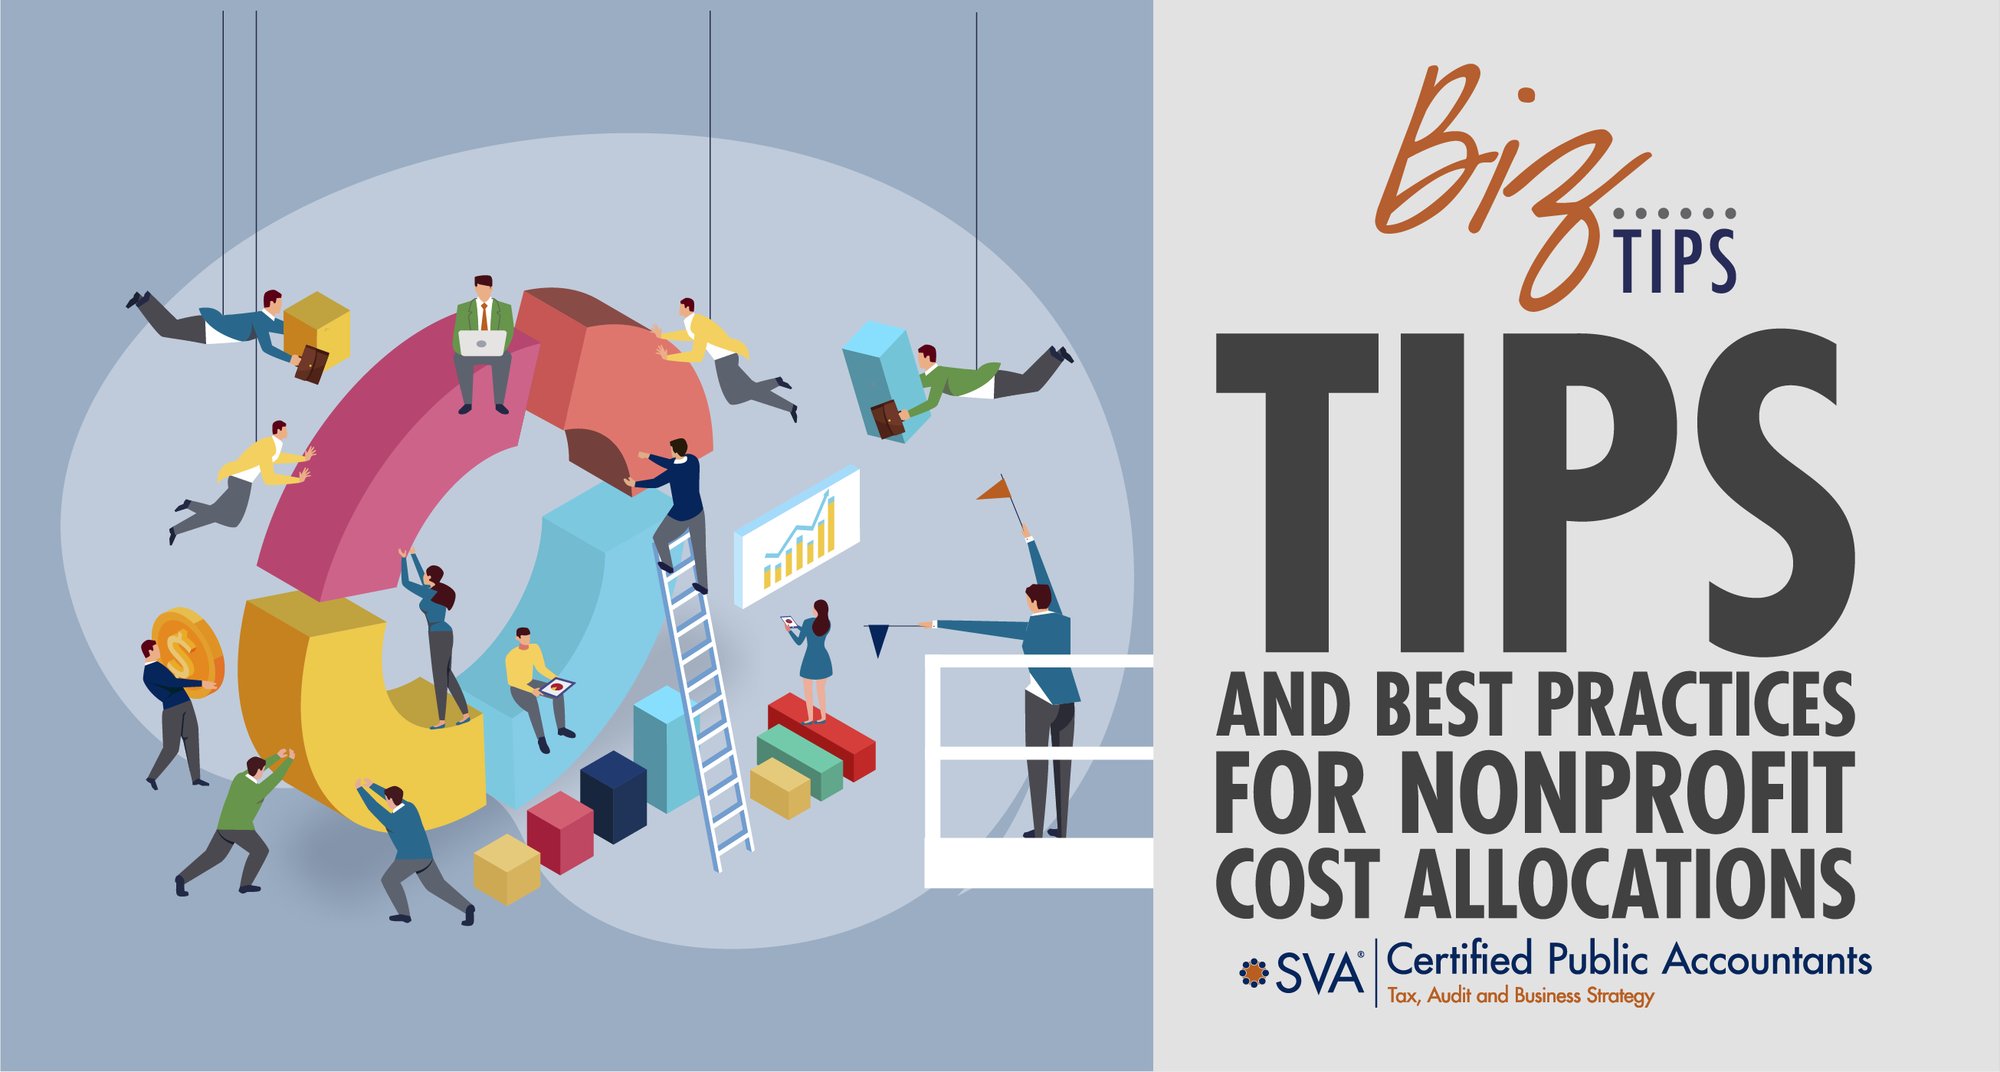 sva-certified-public-accountants-biz-tips-tips-and-best-practices-for-nonprofit-cost-allocations